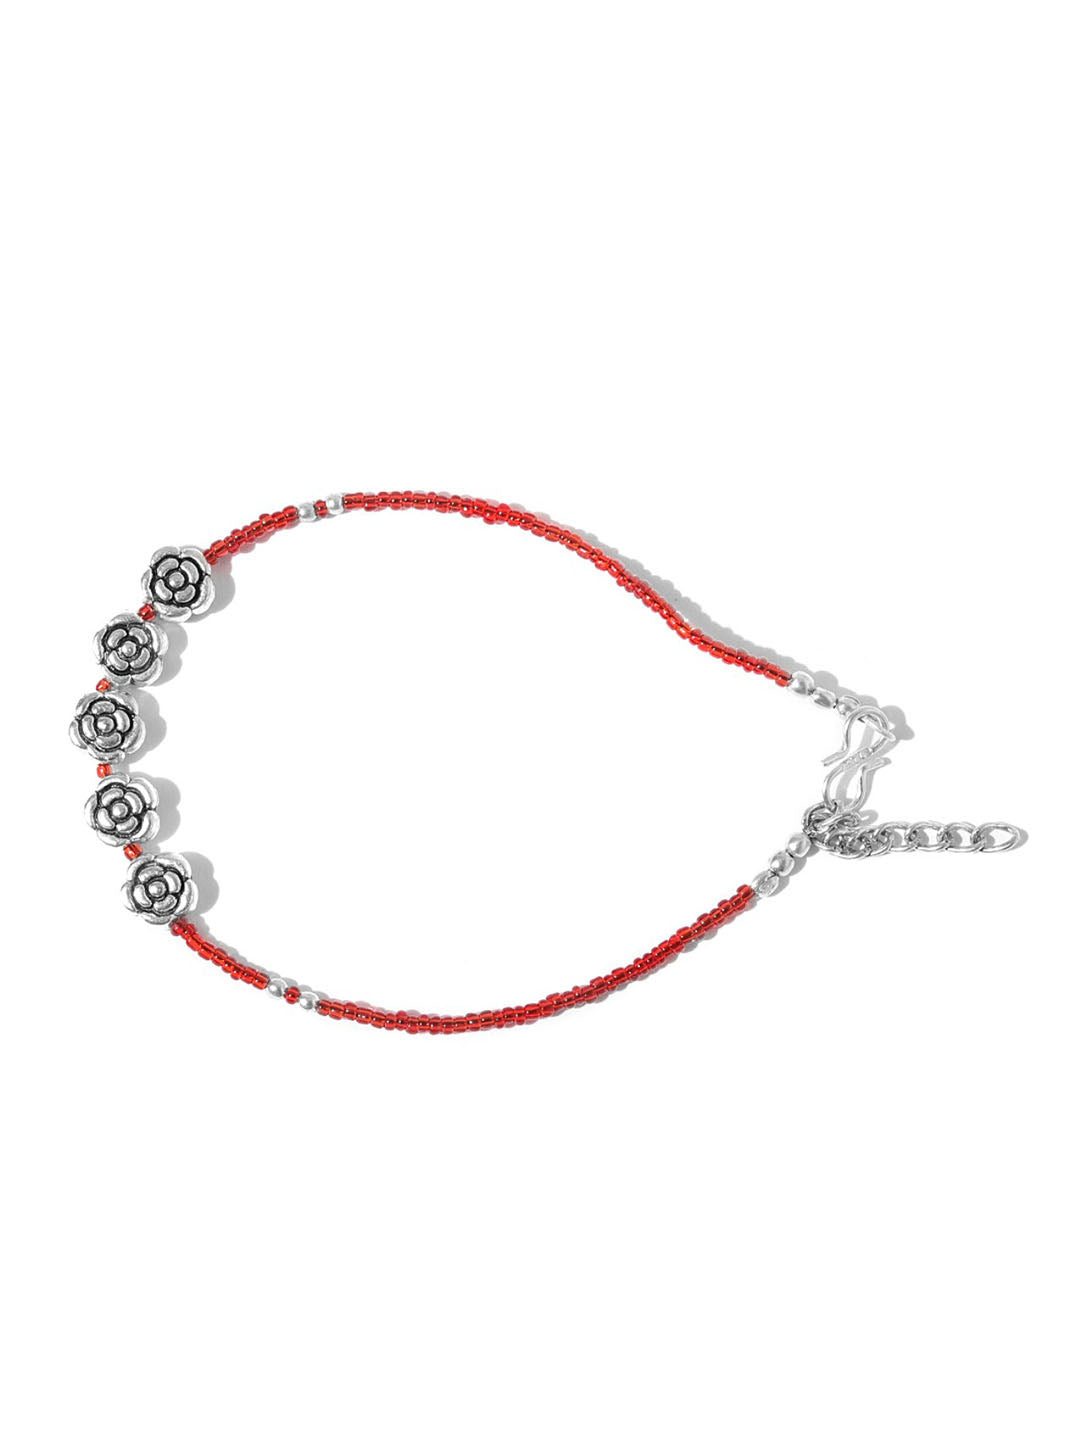 Oxidised Silver-Toned & Red Beaded Anklets For Women And Girls